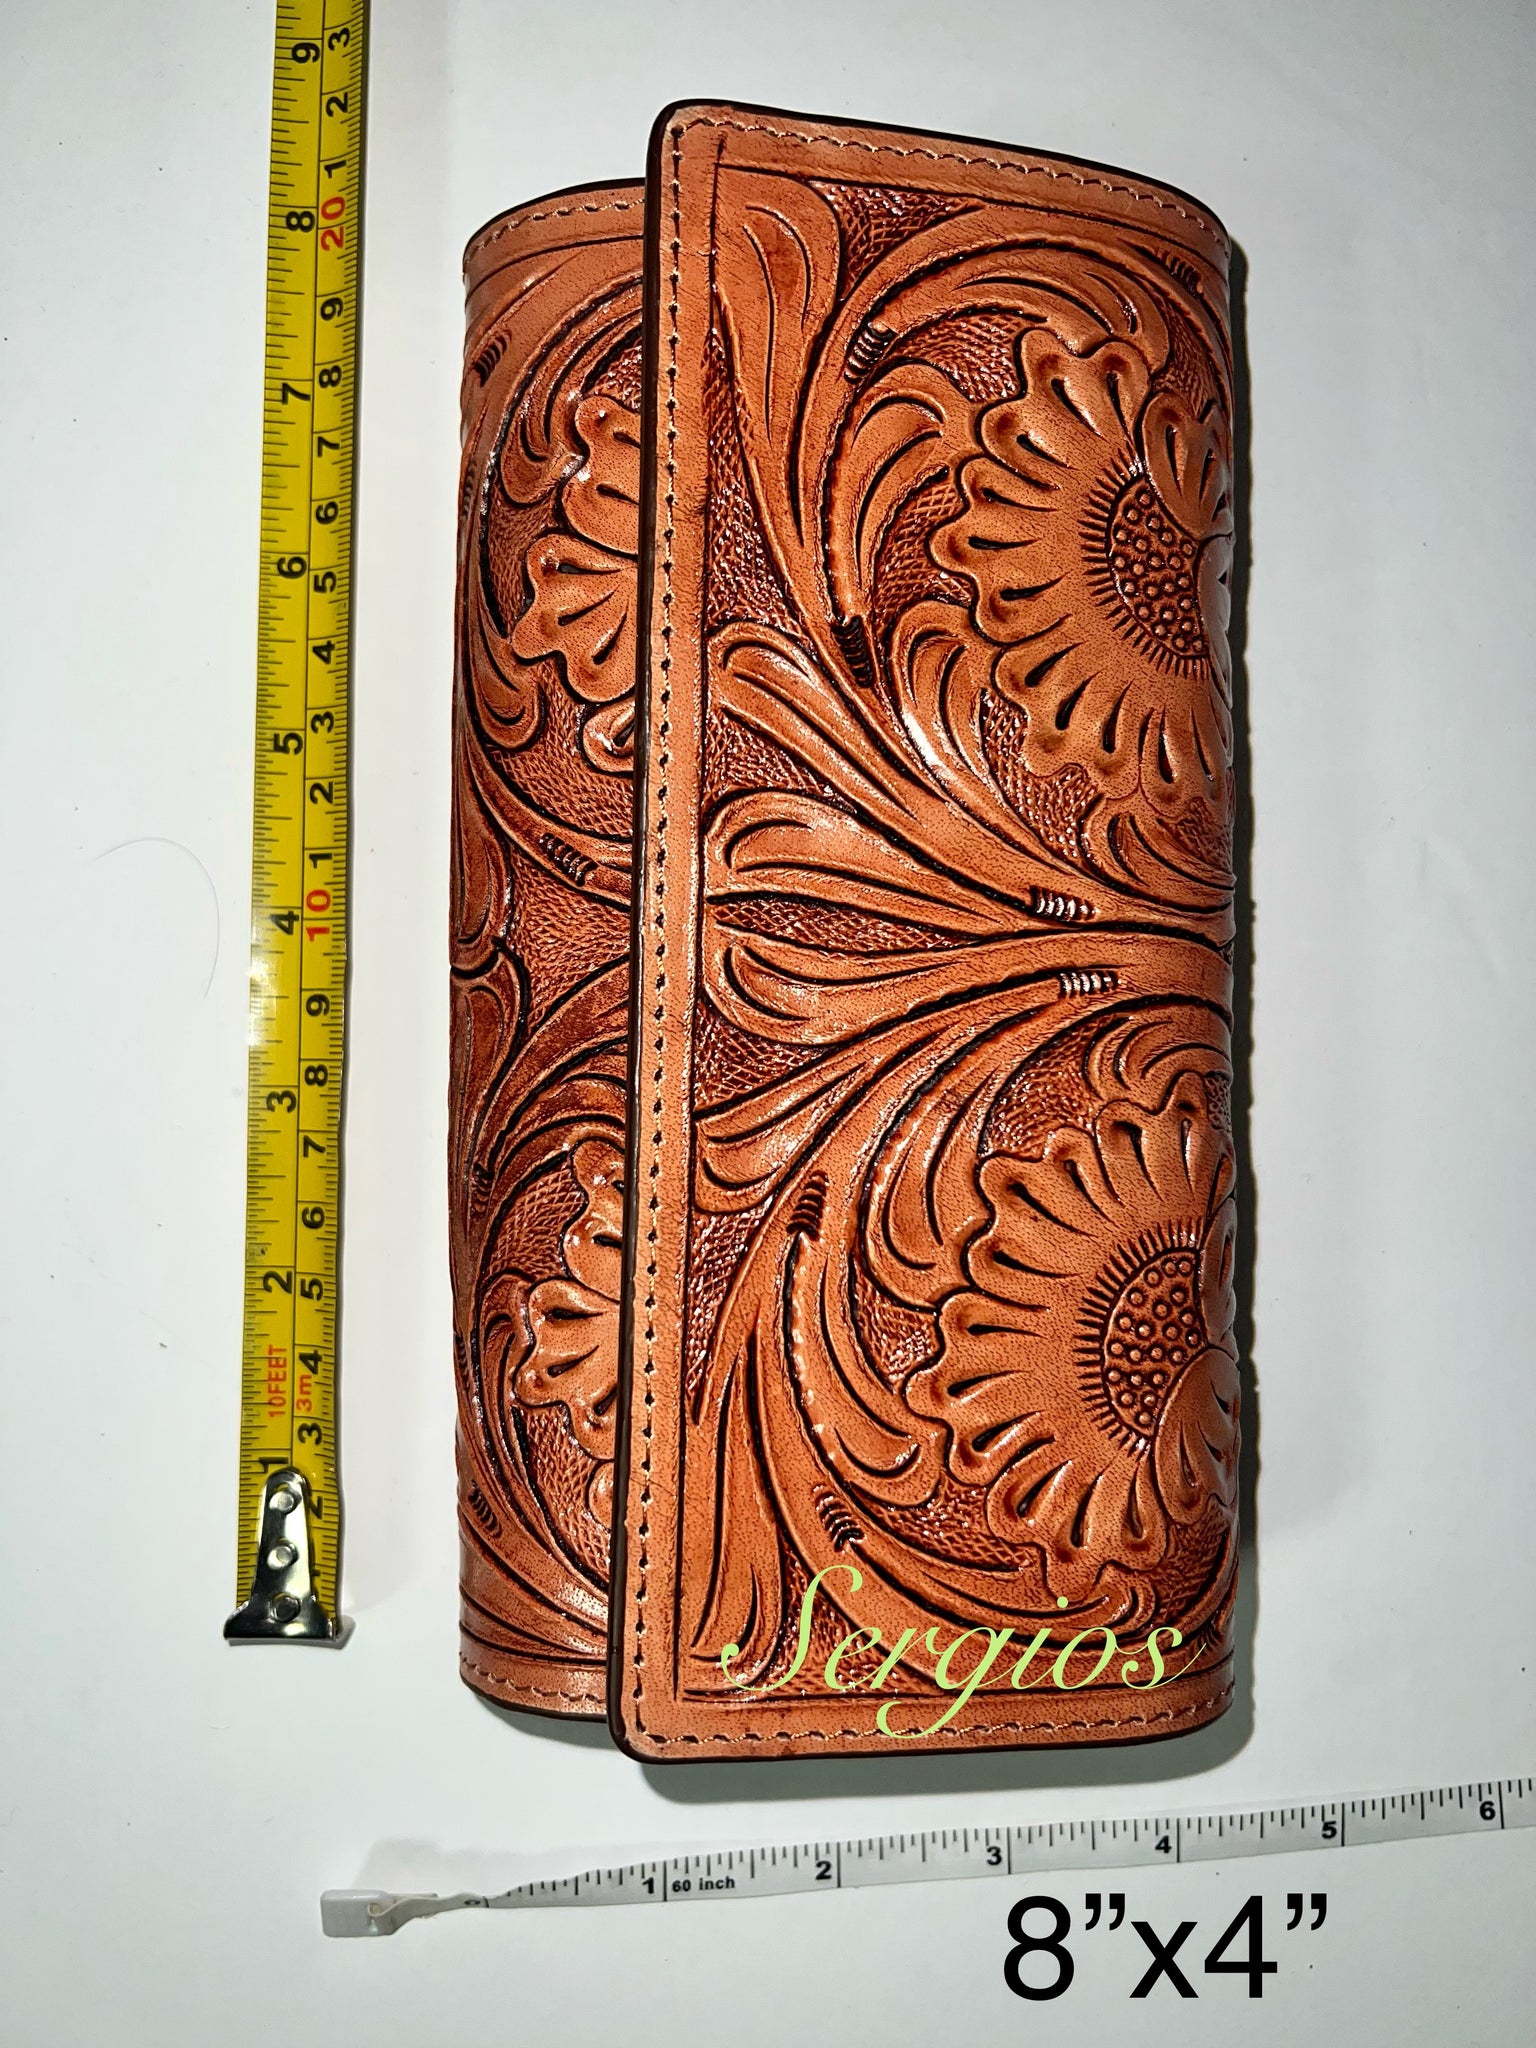 Beautiful hand tooled and paint wallet . – SergiosCollection